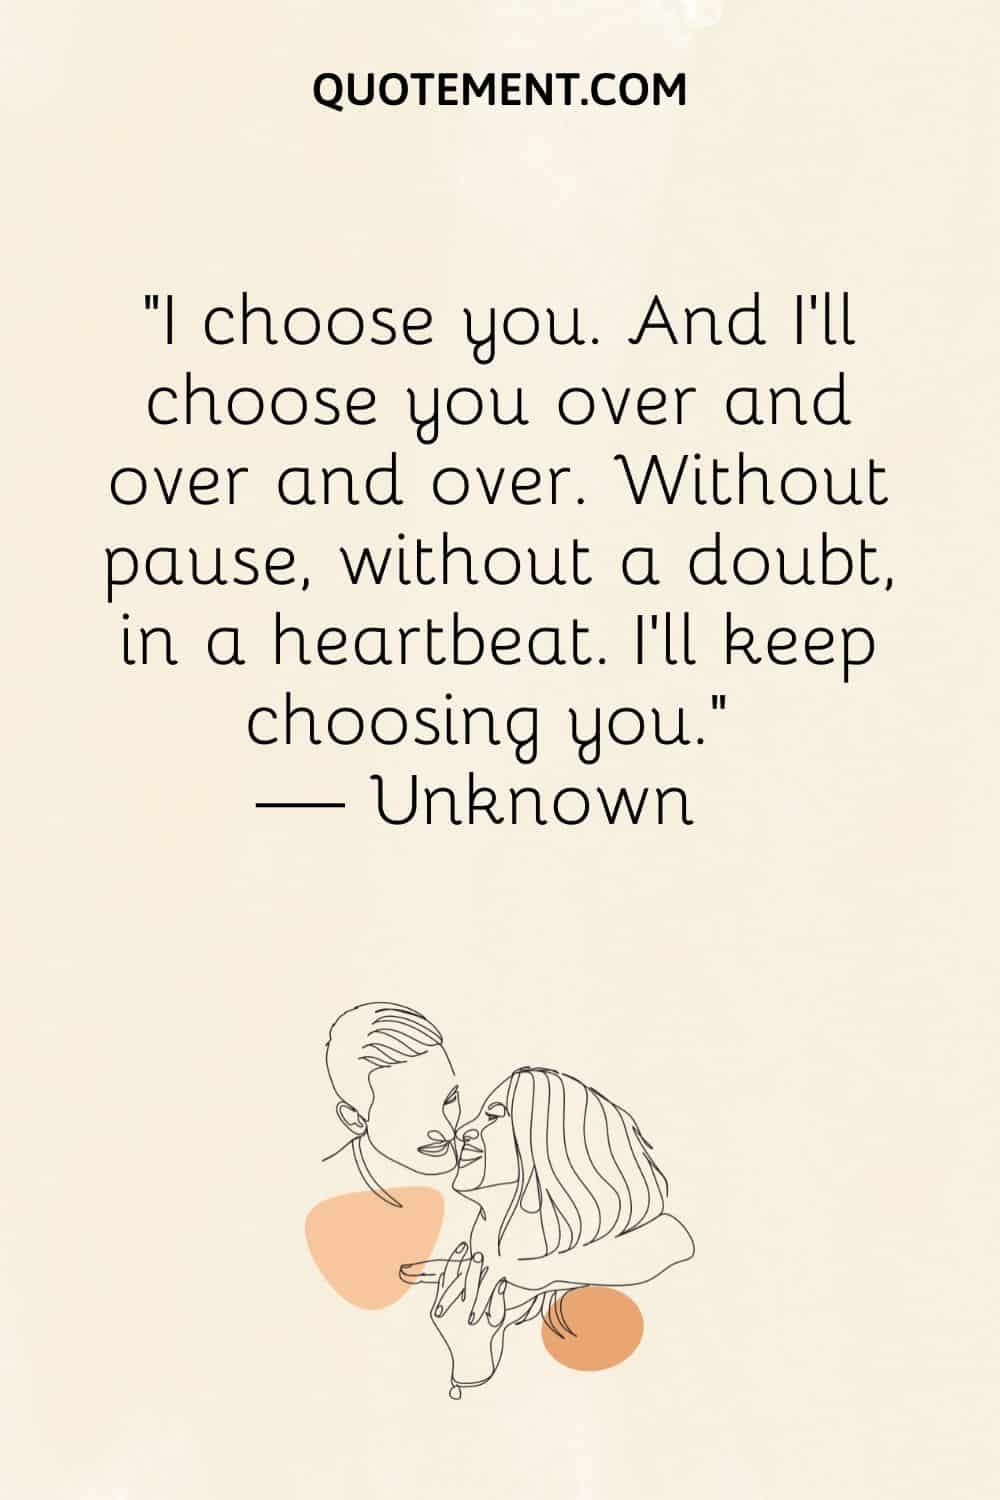 I'll choose you over and over and over